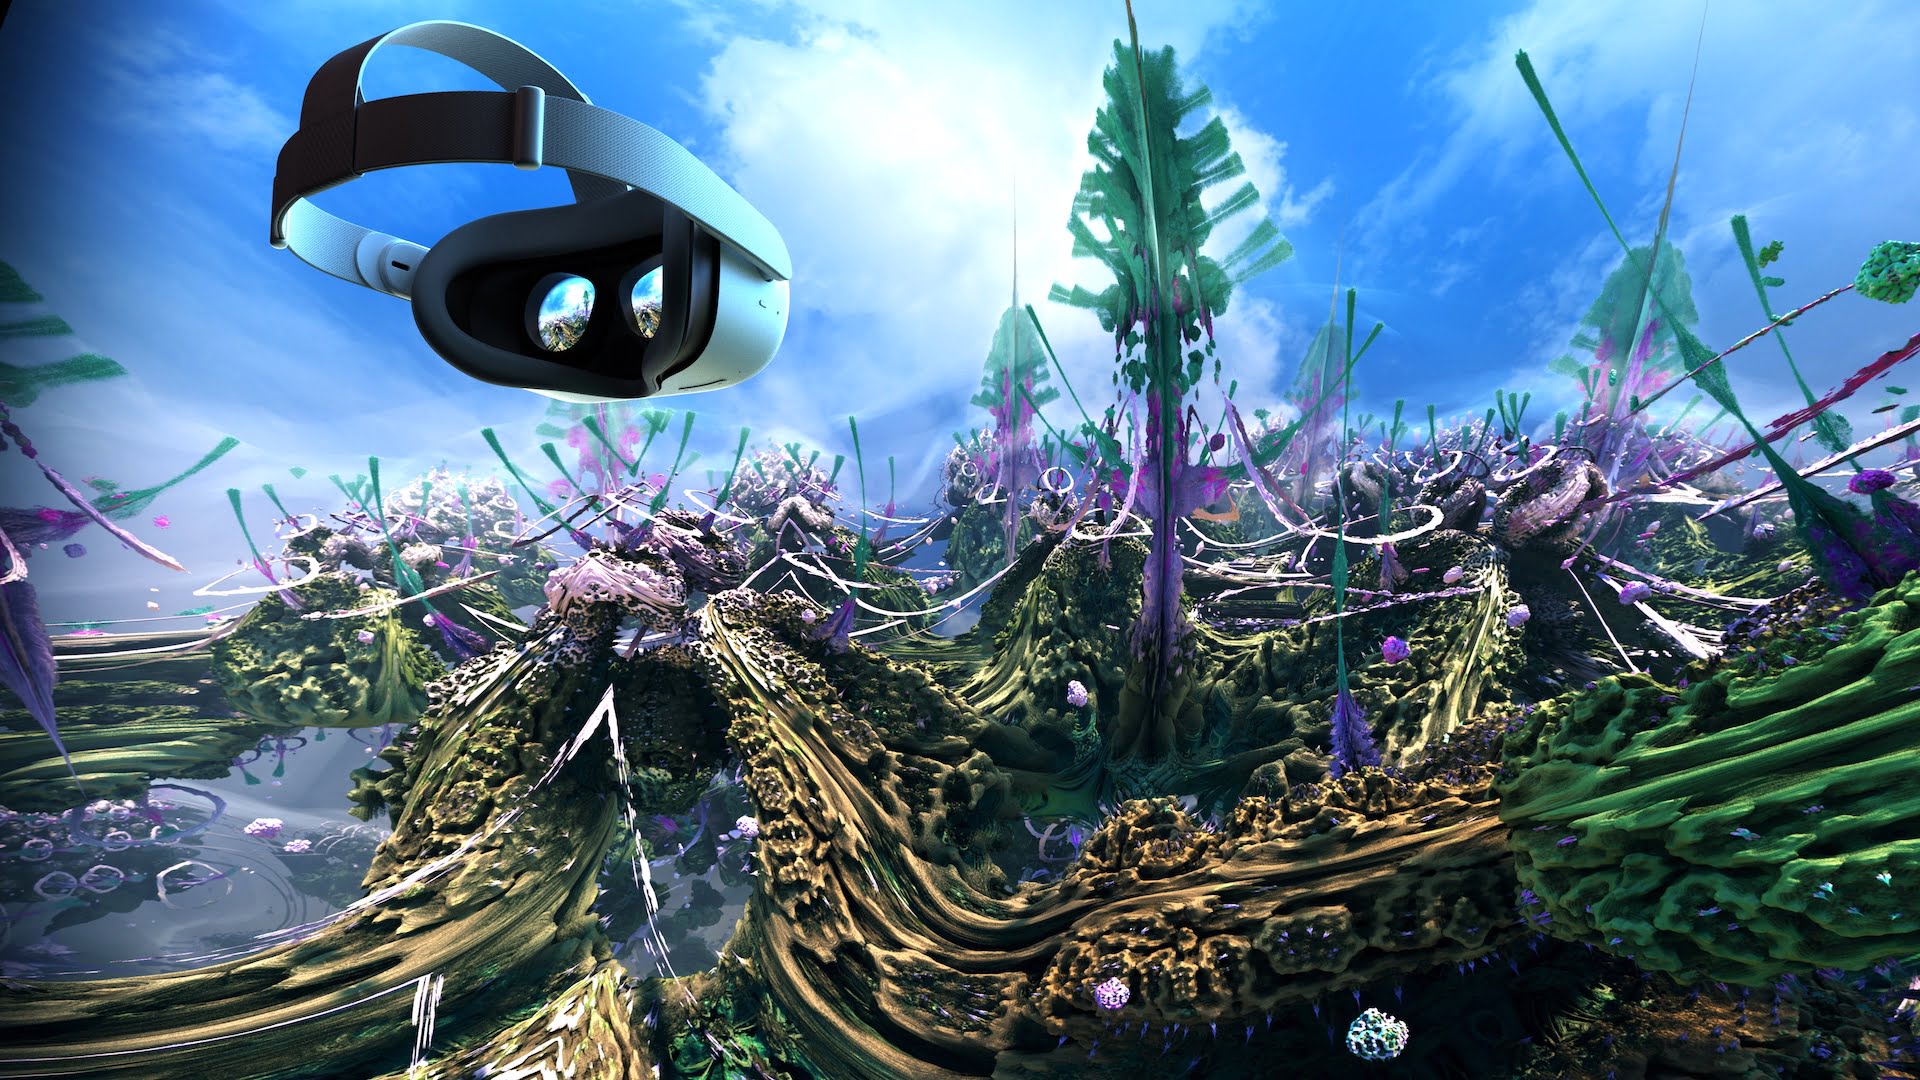 This VR movie is a mind-boggling trip through Fractal landscapes